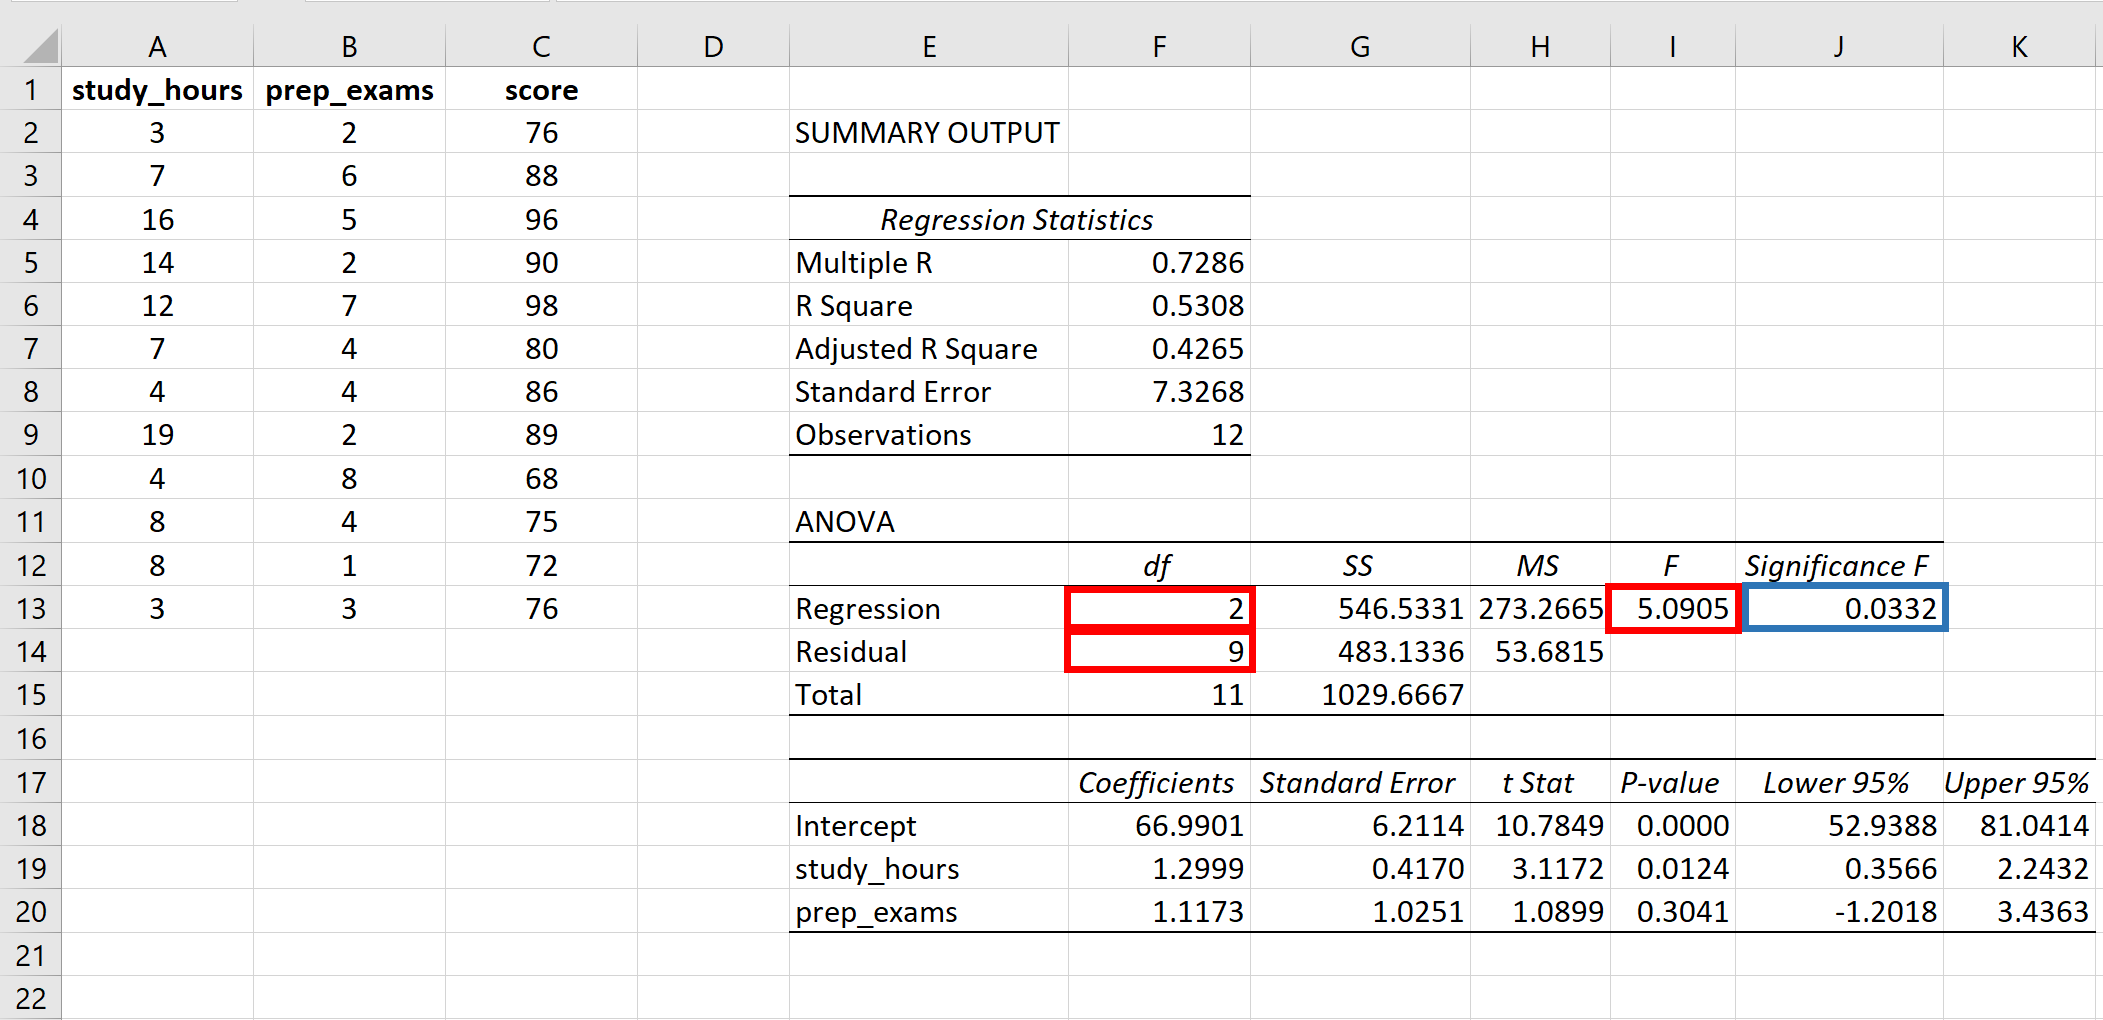 P-value of F-statistic in Excel